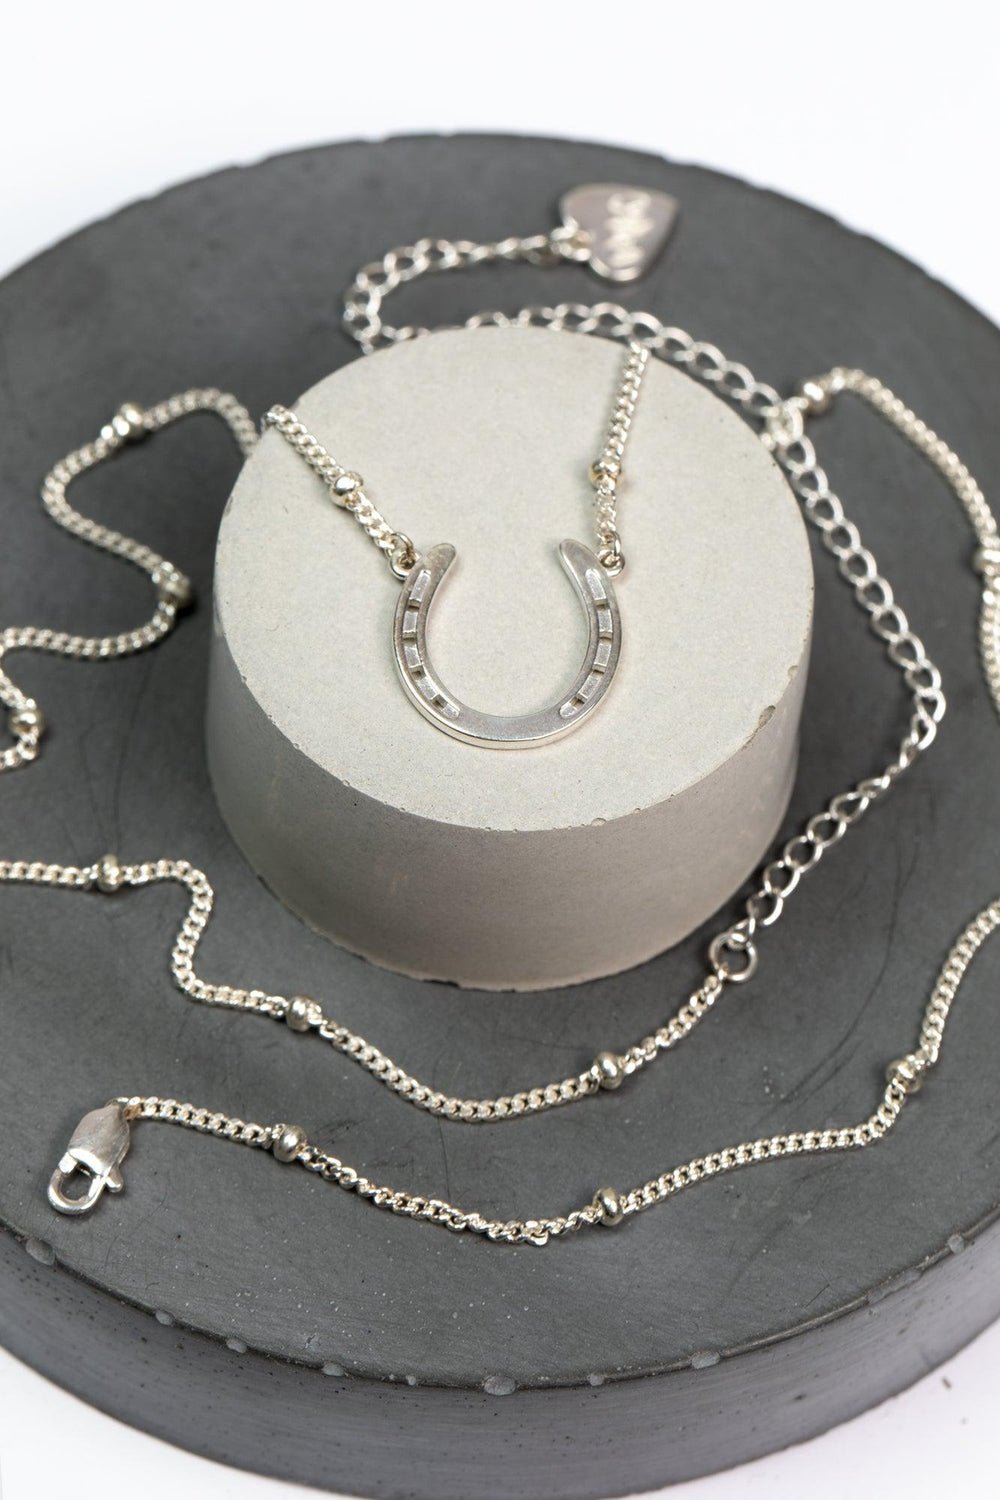 The Horse Shoe Necklace in Gold and Silver - The Wild Horse Club